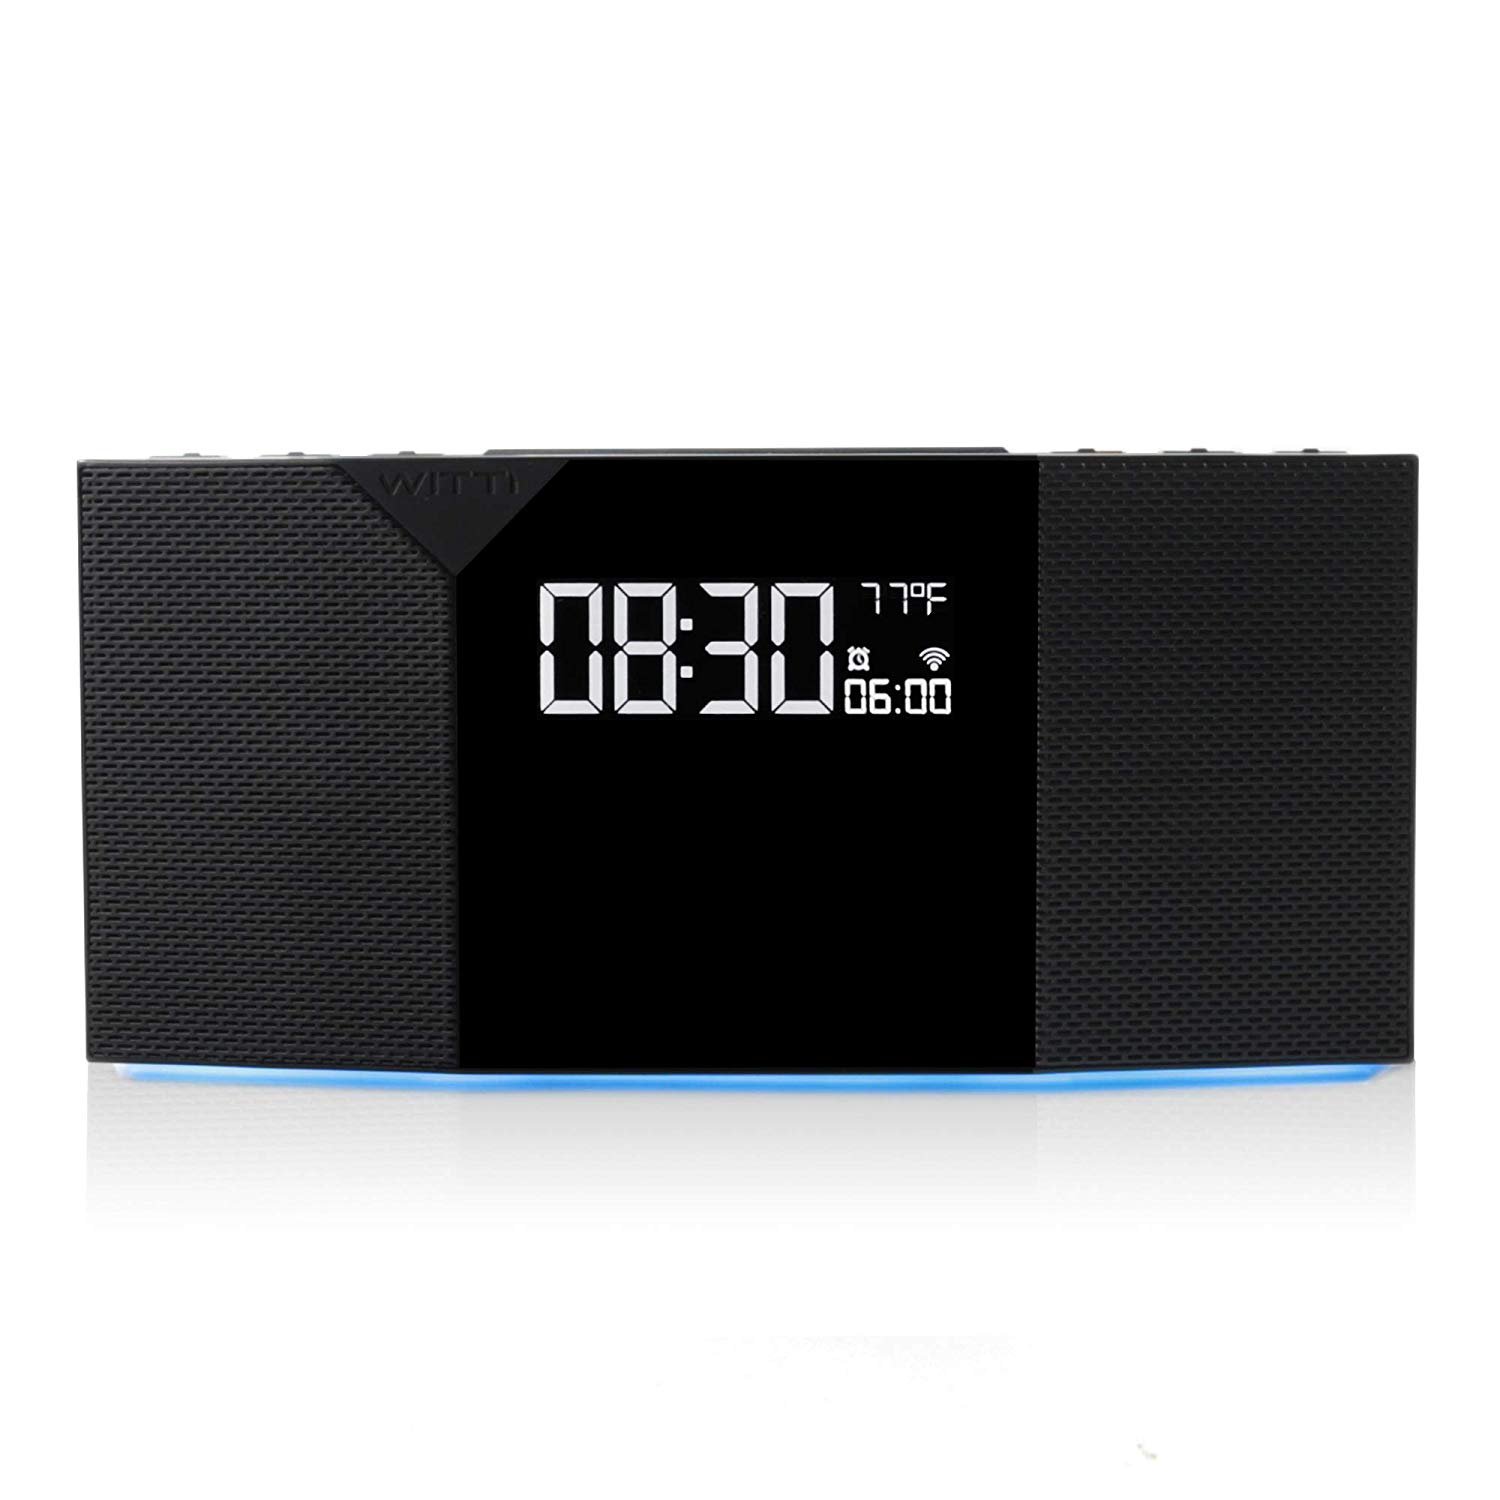 WITTI BEDDI Glow SE | App Enabled Intelligent Alarm Clock with Wake-up Light, Bluetooth Speaker and USB Charging Station 2